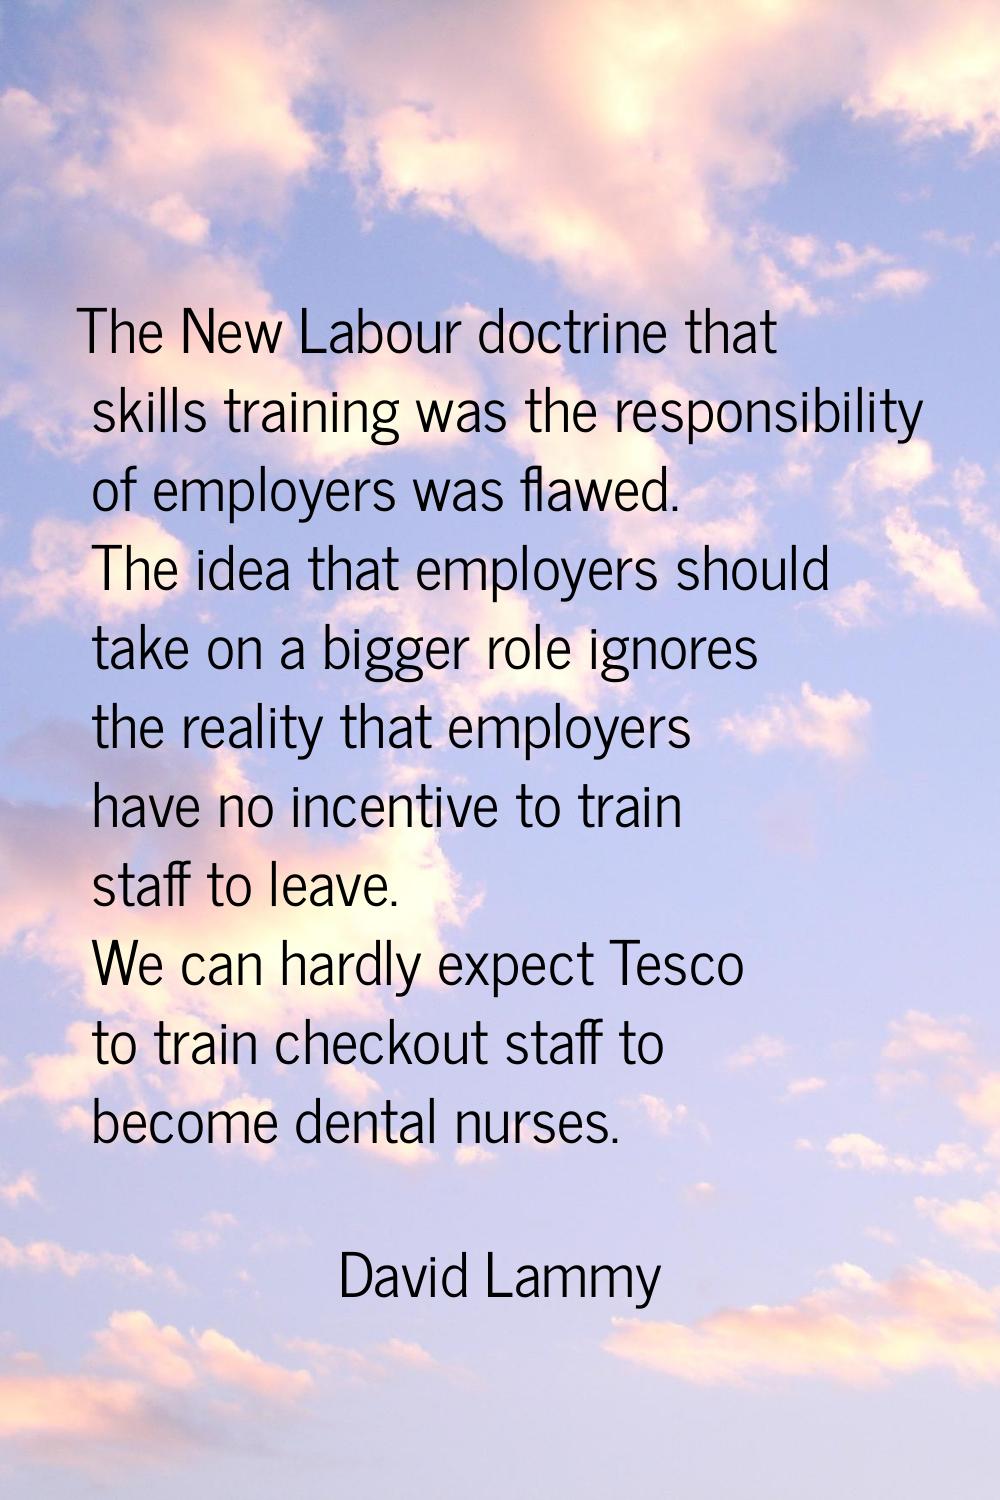 The New Labour doctrine that skills training was the responsibility of employers was flawed. The id